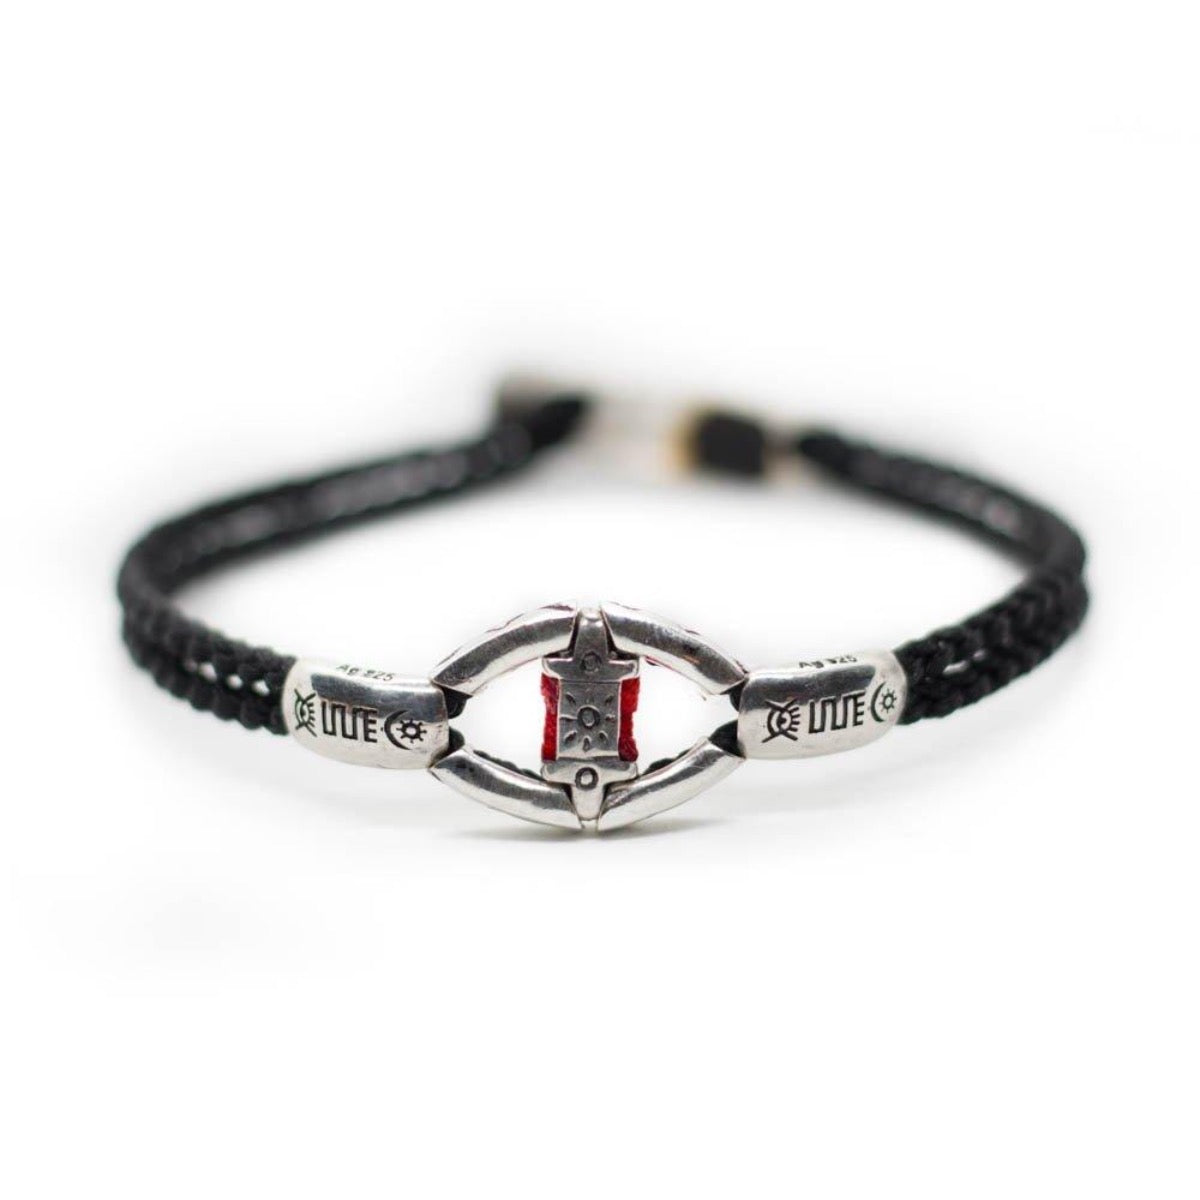 Custom design silver bracelet with a symbol called devotion with hand braided black string, 